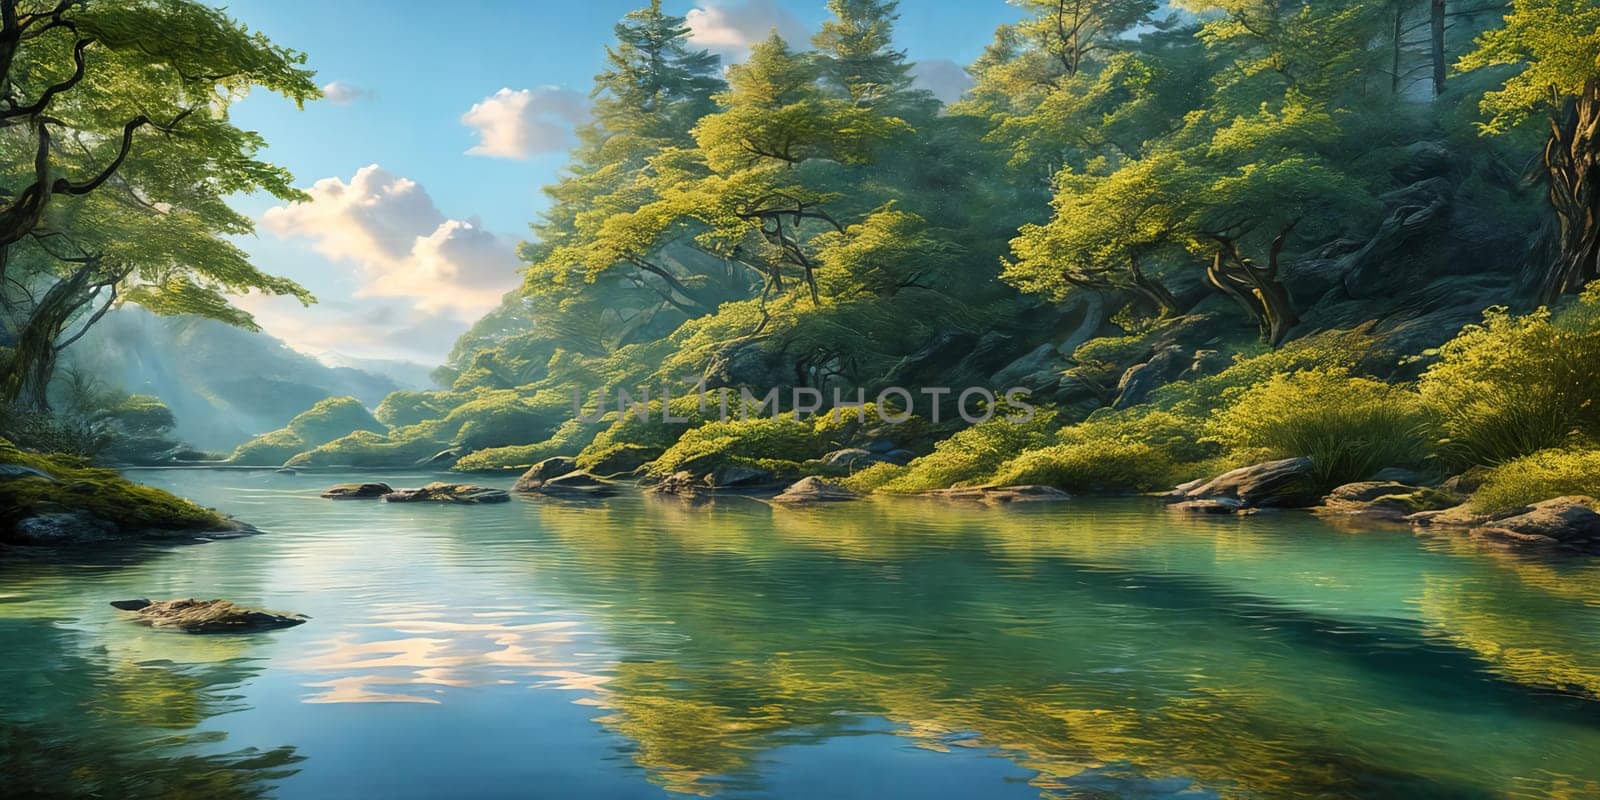 A breathtaking scene at dusk. Serene mountain forest by a glittering lake with a tent pitched